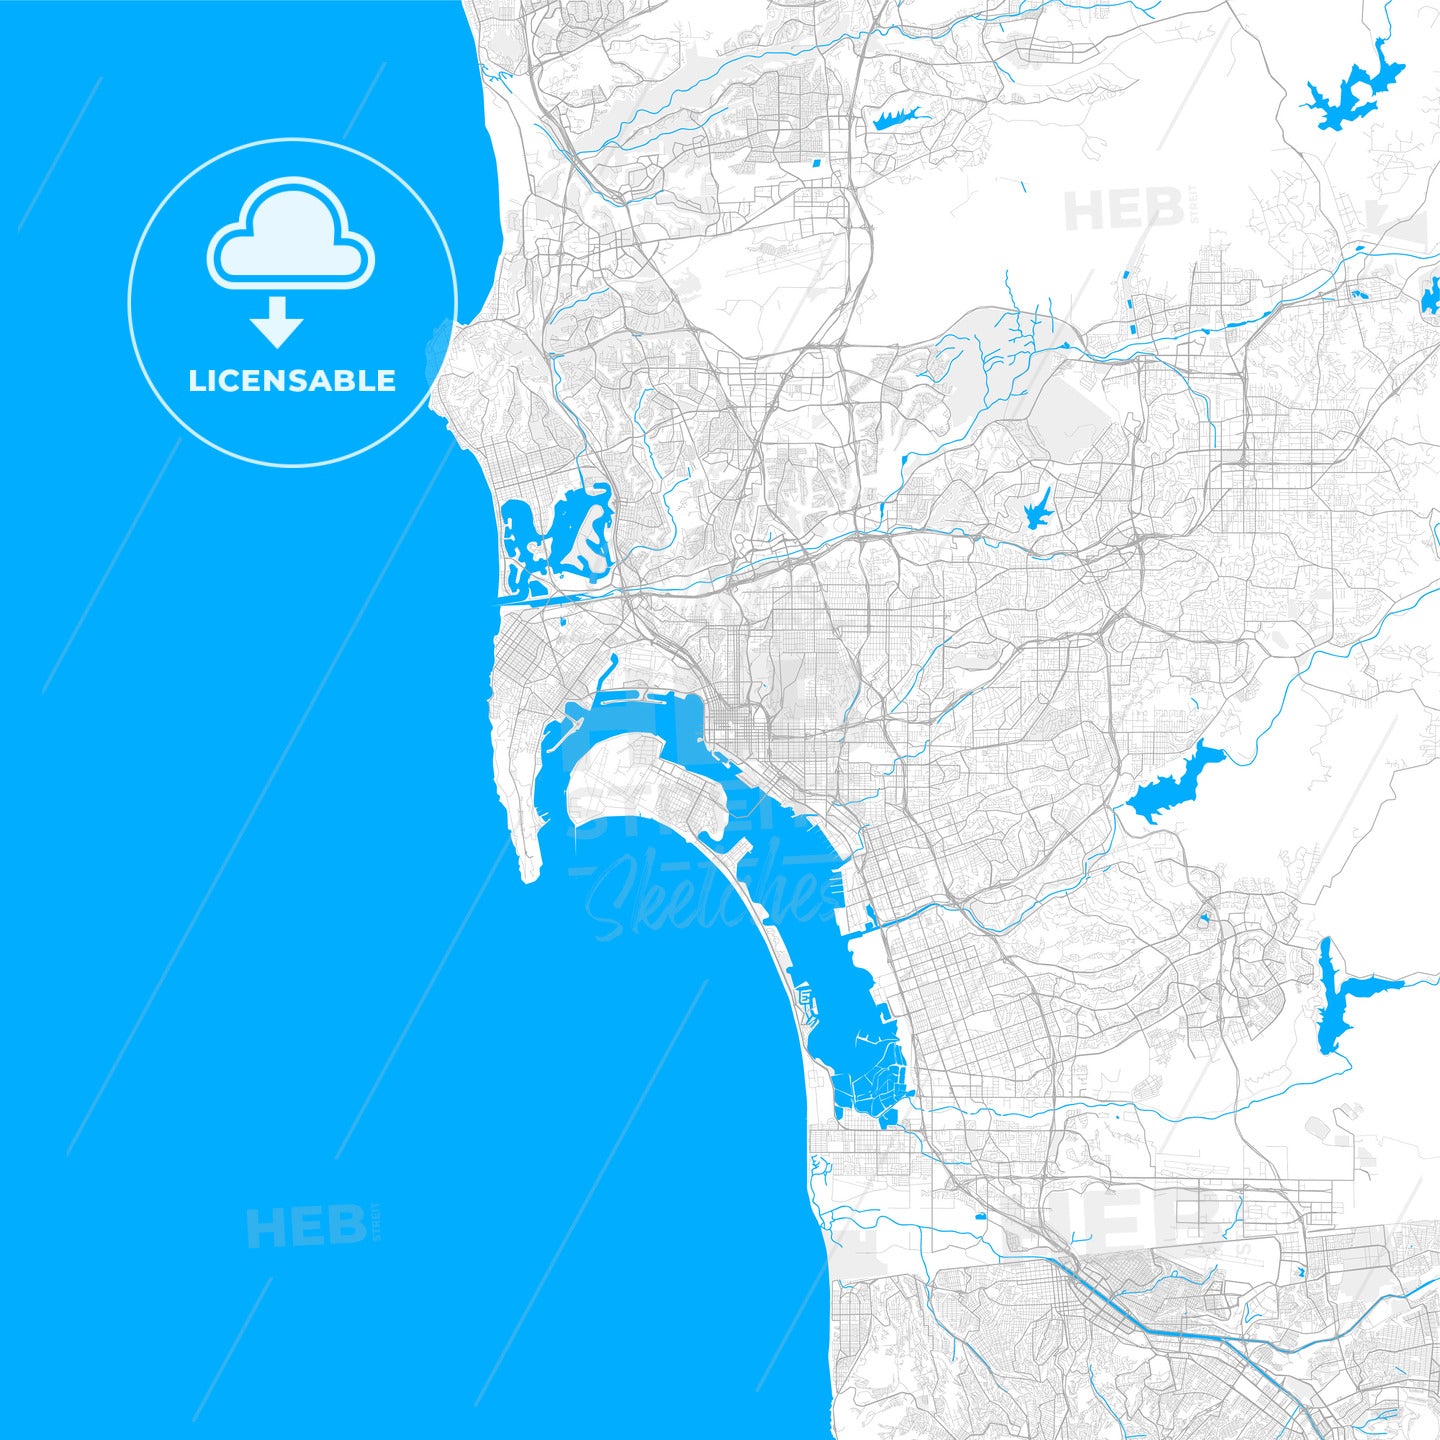 Rich detailed vector map of San Diego, California, U.S.A.